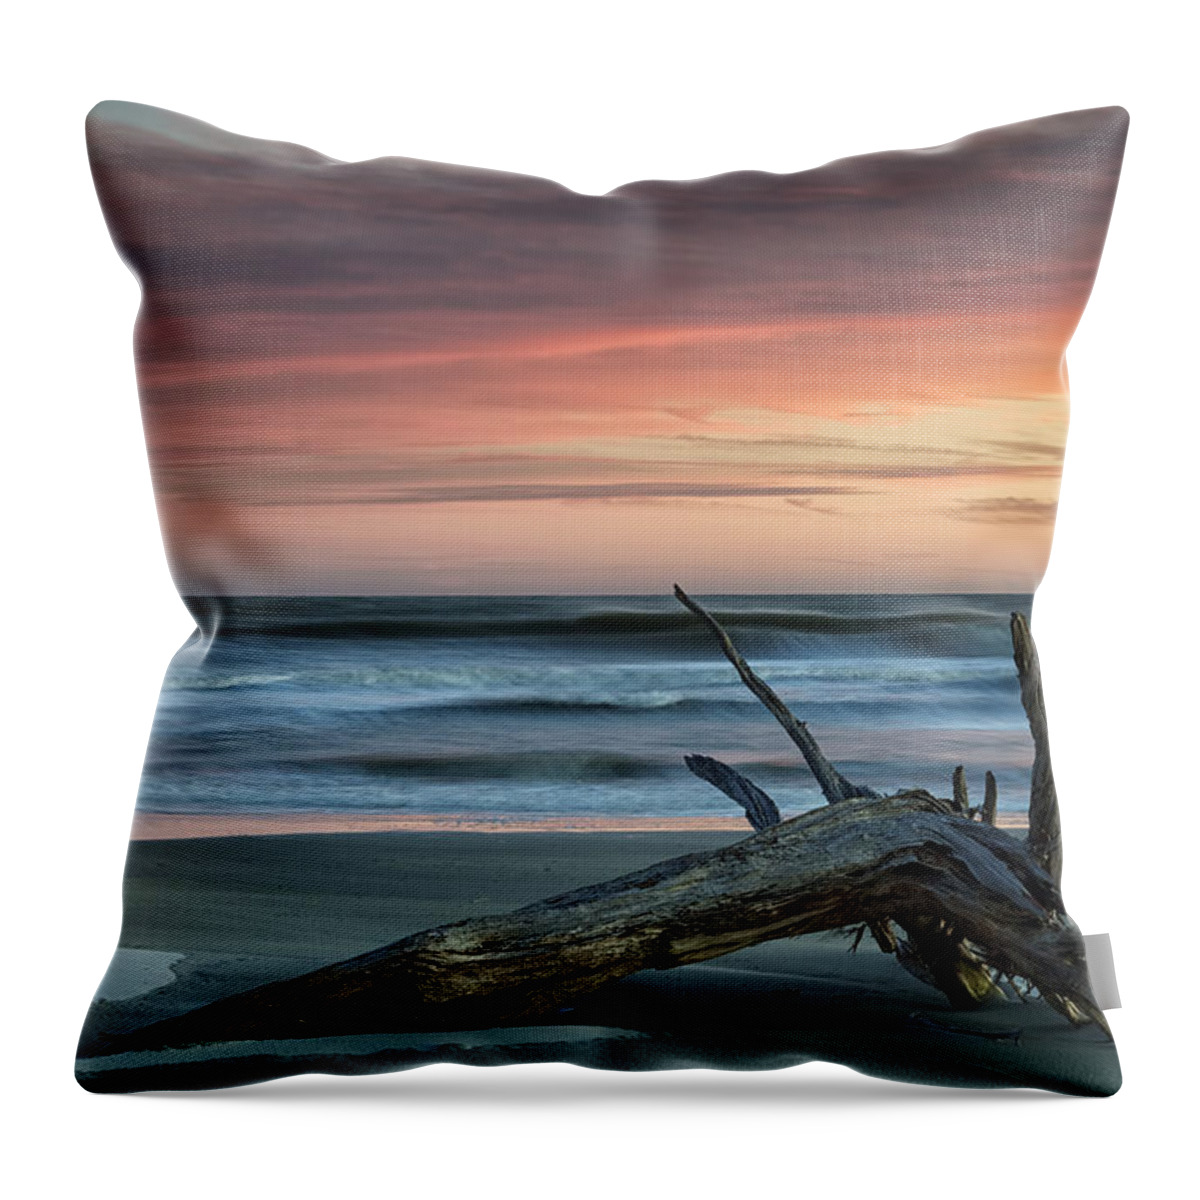 Beach Throw Pillow featuring the photograph Battered Driftwood by Phill Doherty